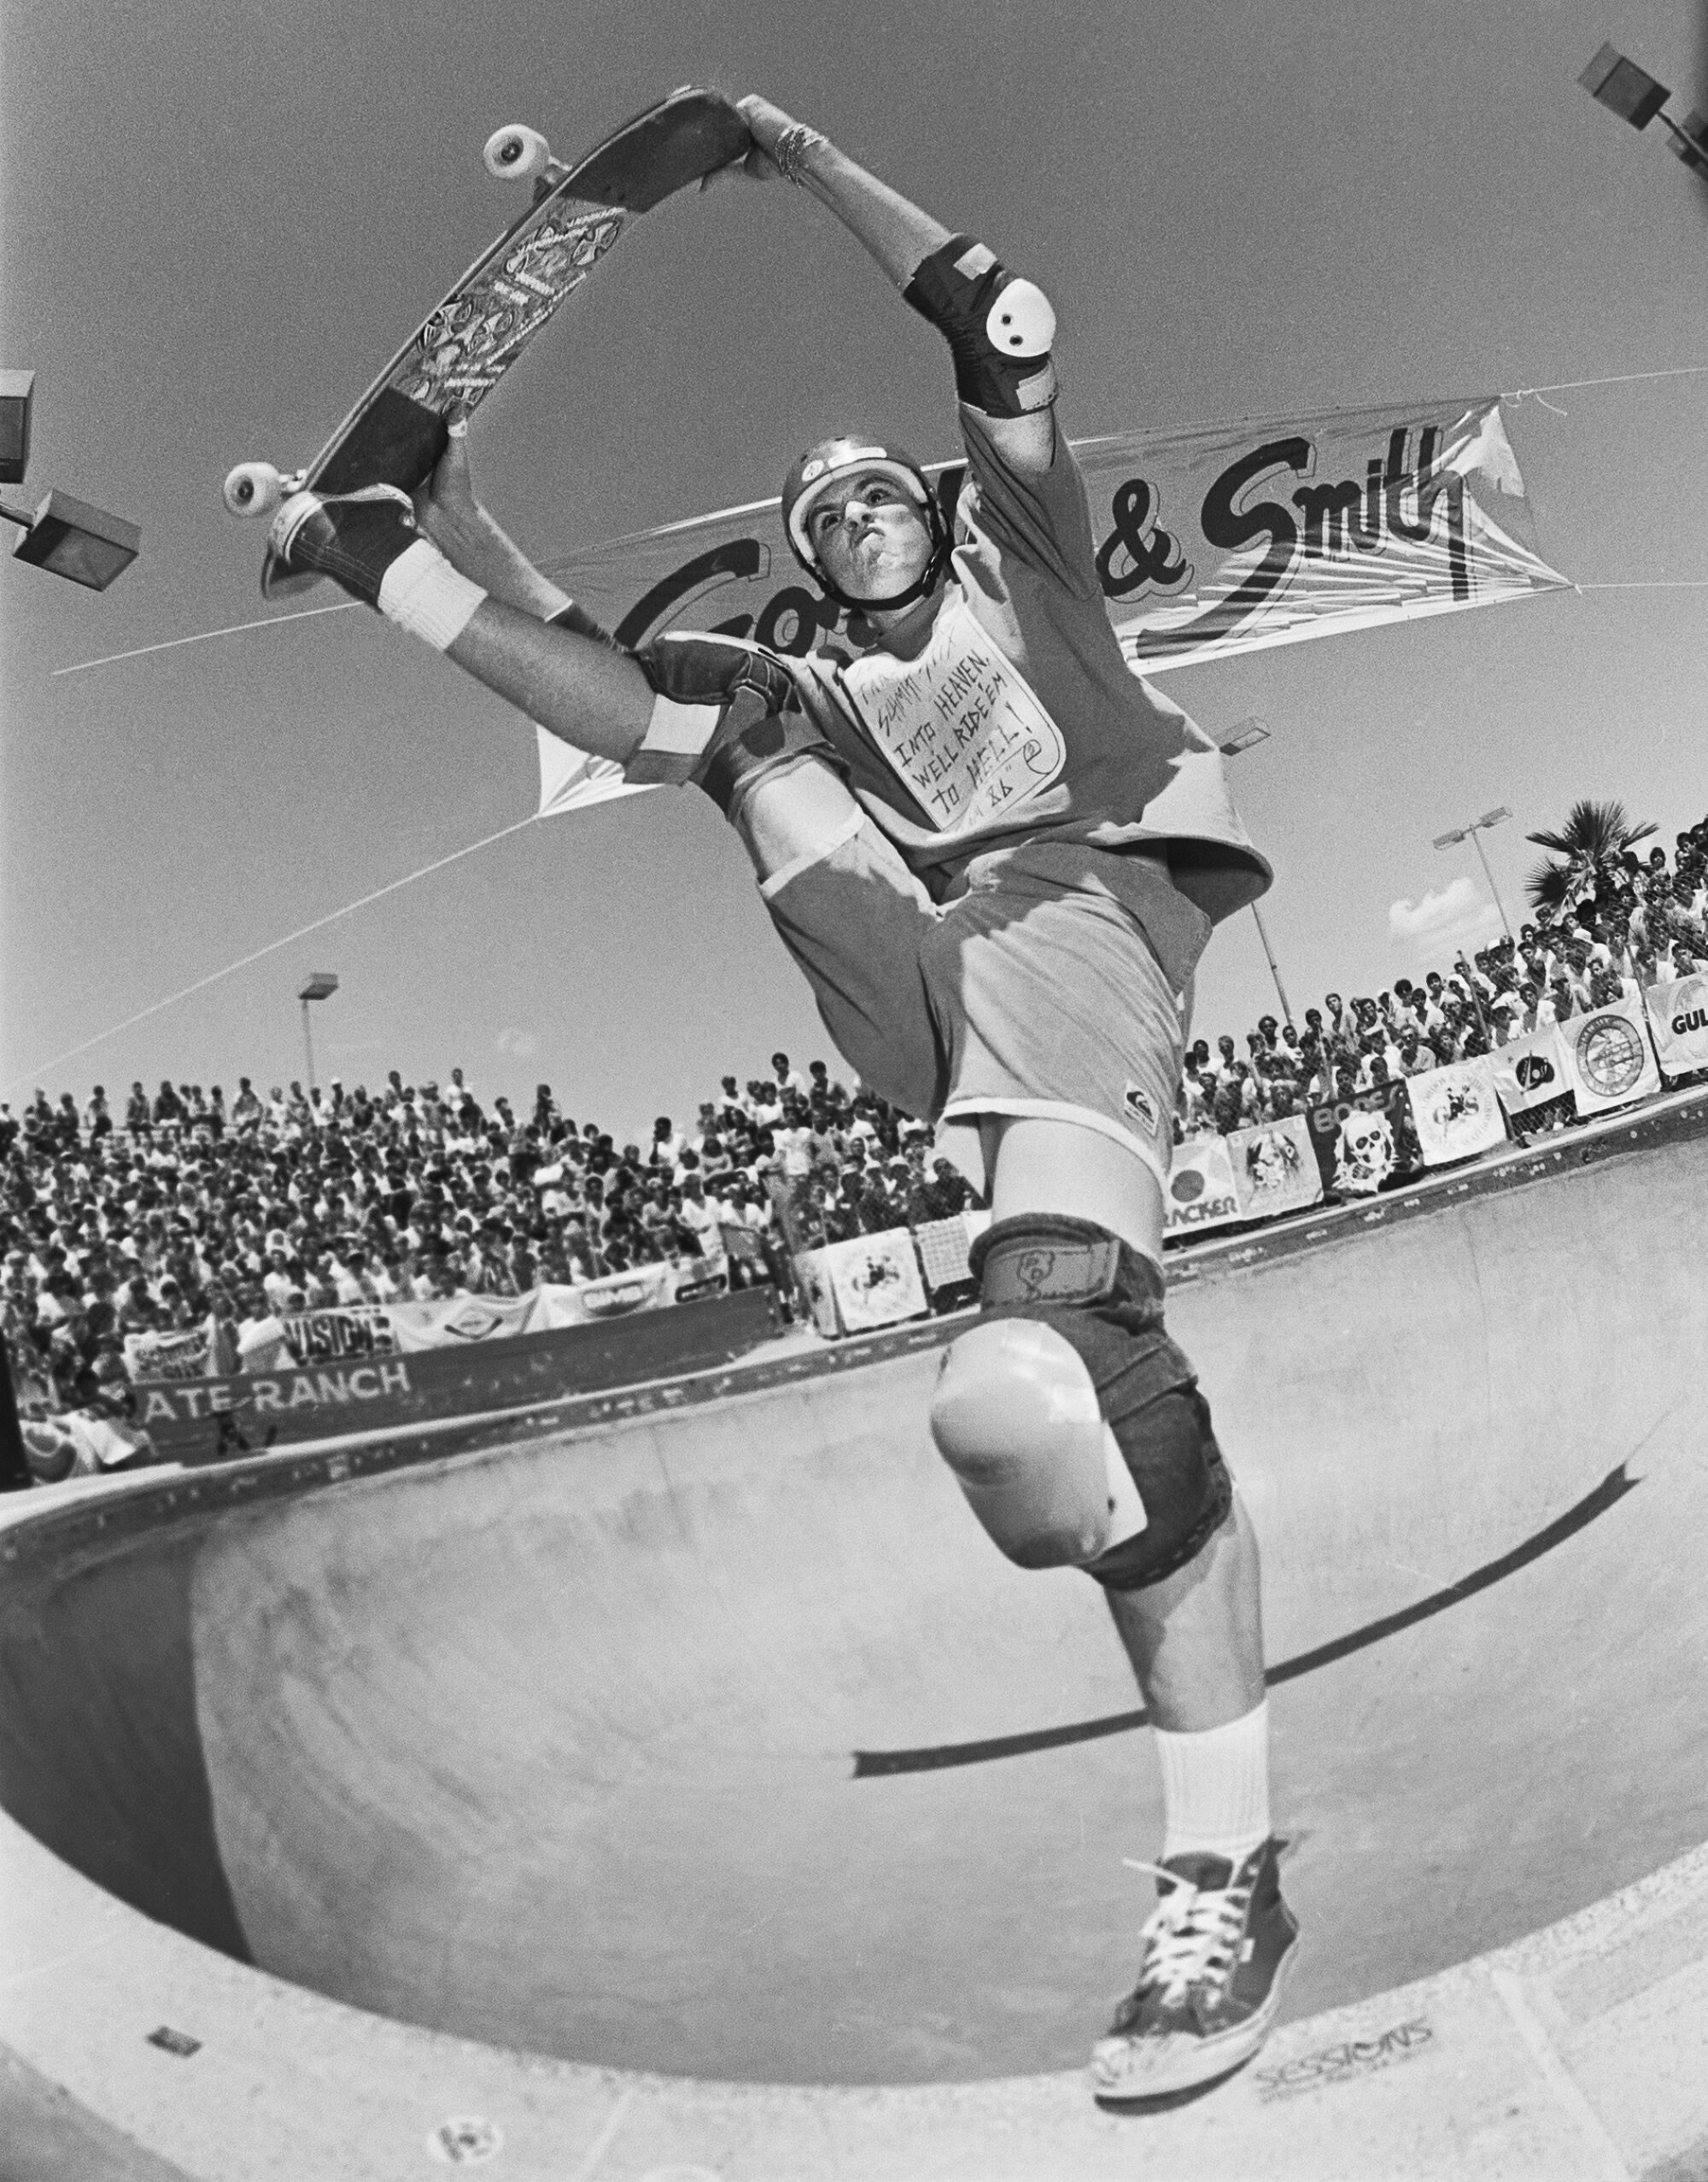 Jeff Grosso performs a Texas plant while at the Del Mar Skate Ranch in 1985.